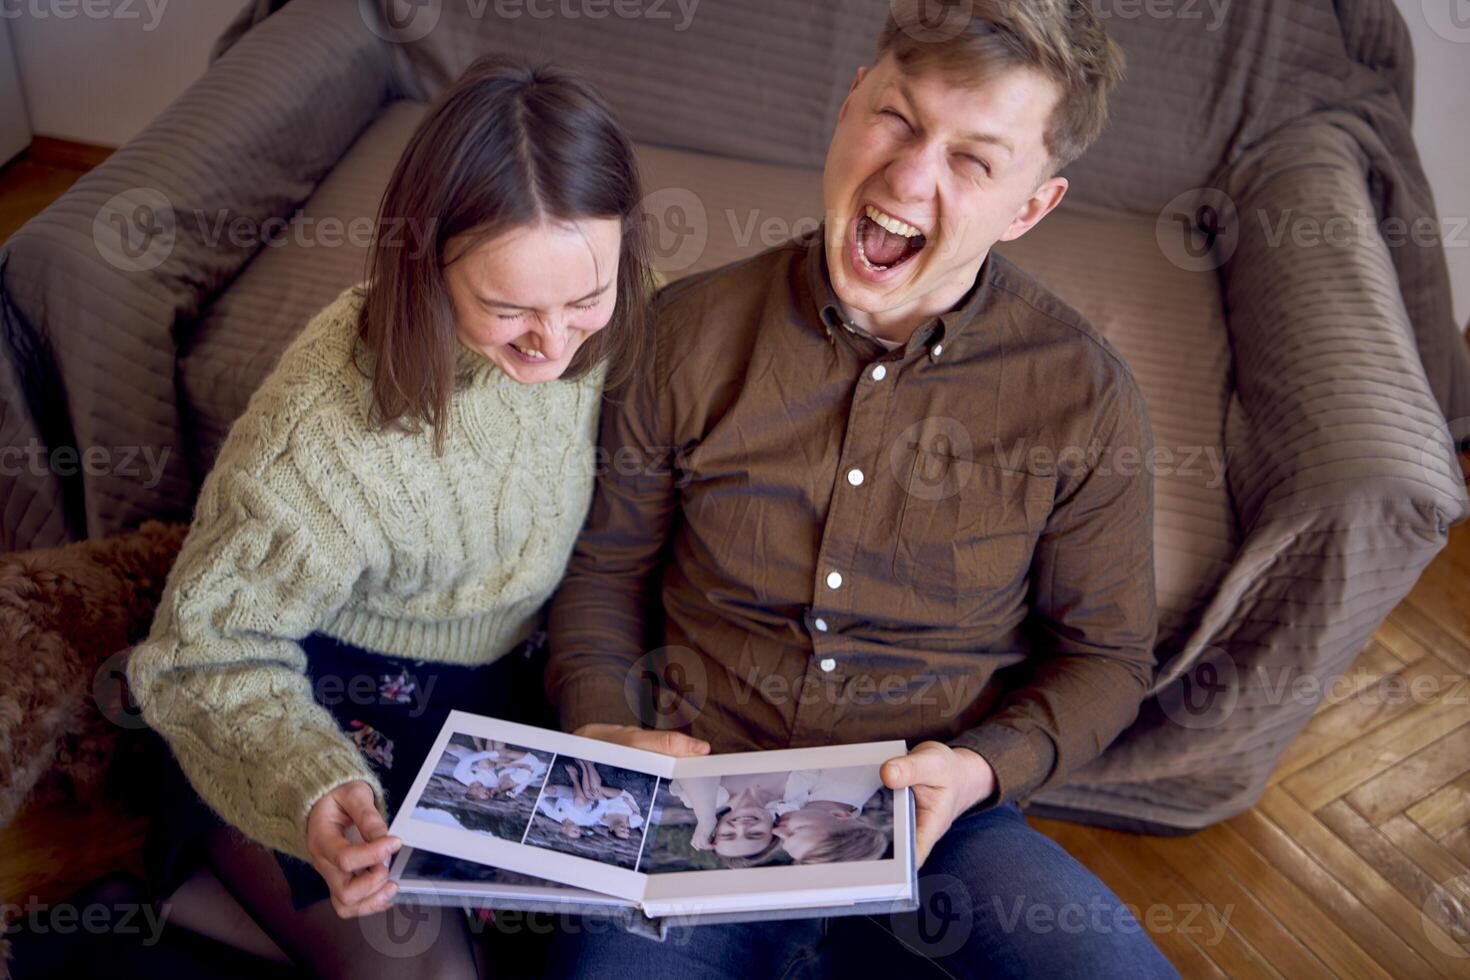 young couple looking at their wedding photo album by the bed in living room, cockapoo running around